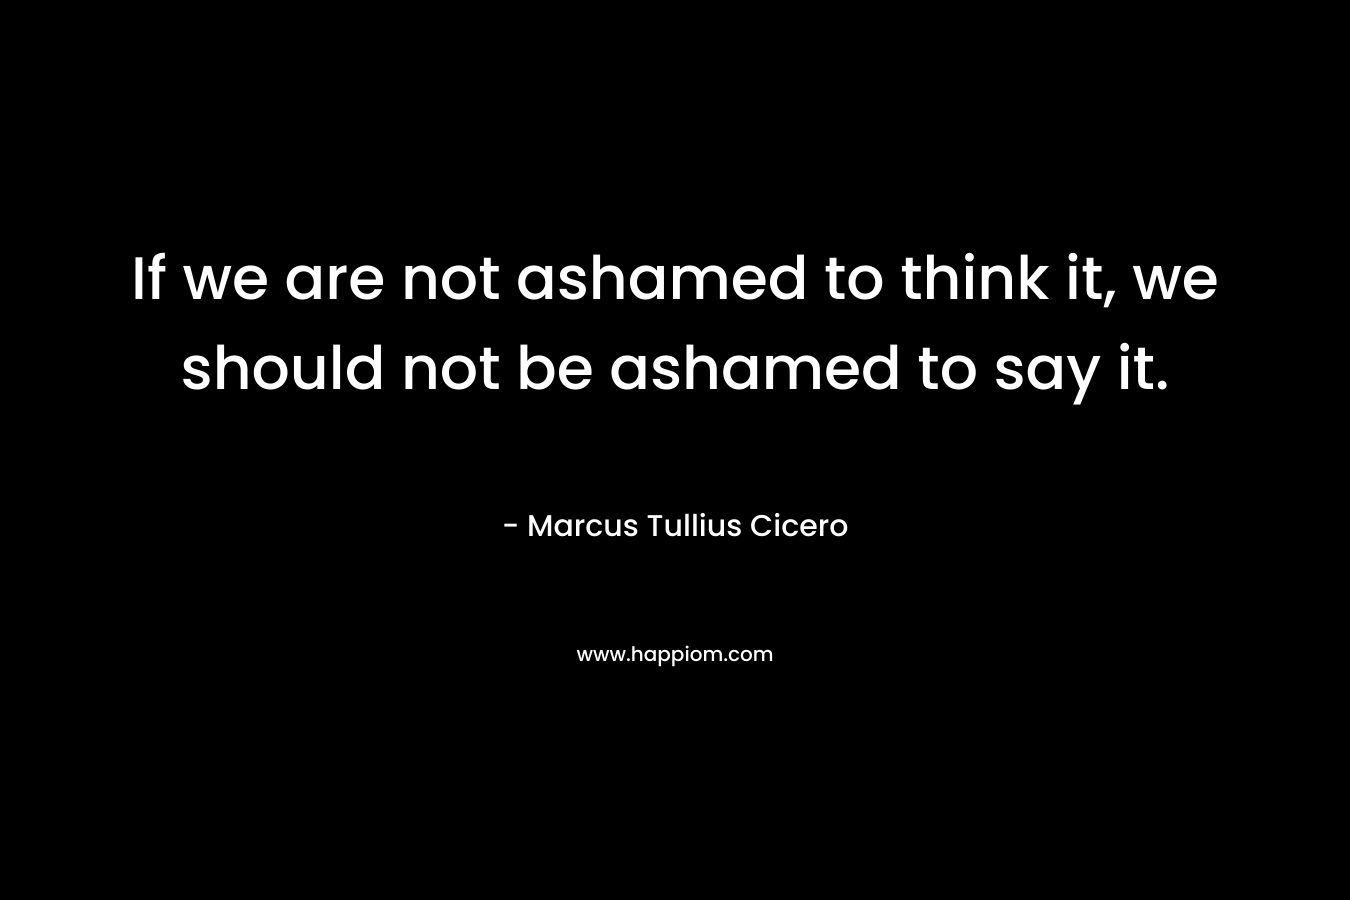 If we are not ashamed to think it, we should not be ashamed to say it. – Marcus Tullius Cicero